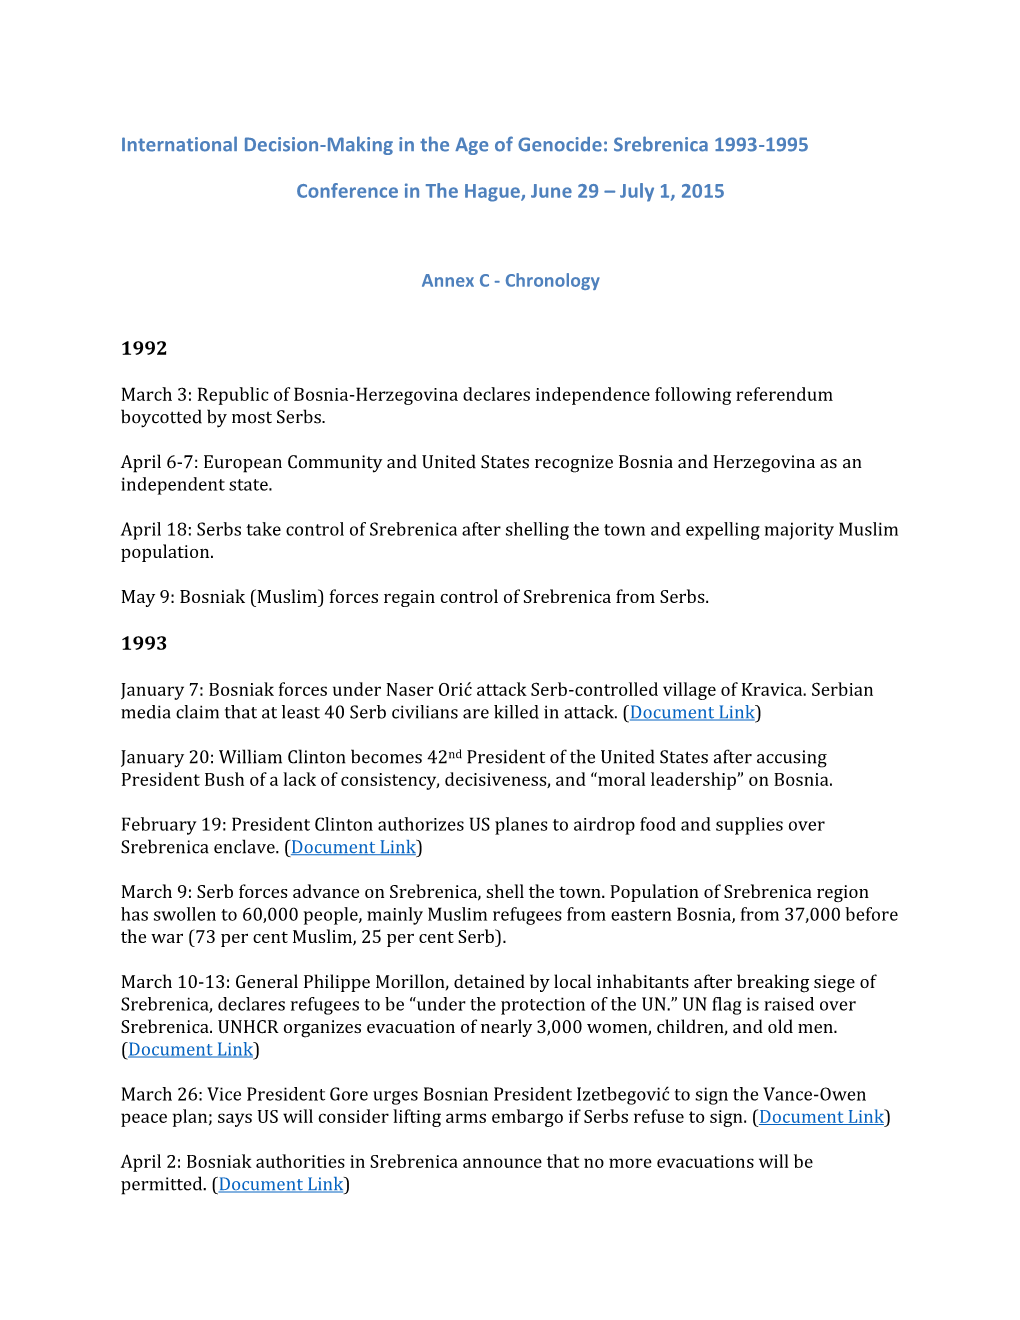 International Decision-Making in the Age of Genocide: Srebrenica 1993-1995 Conference in the Hague, June 29 – July 1, 2015